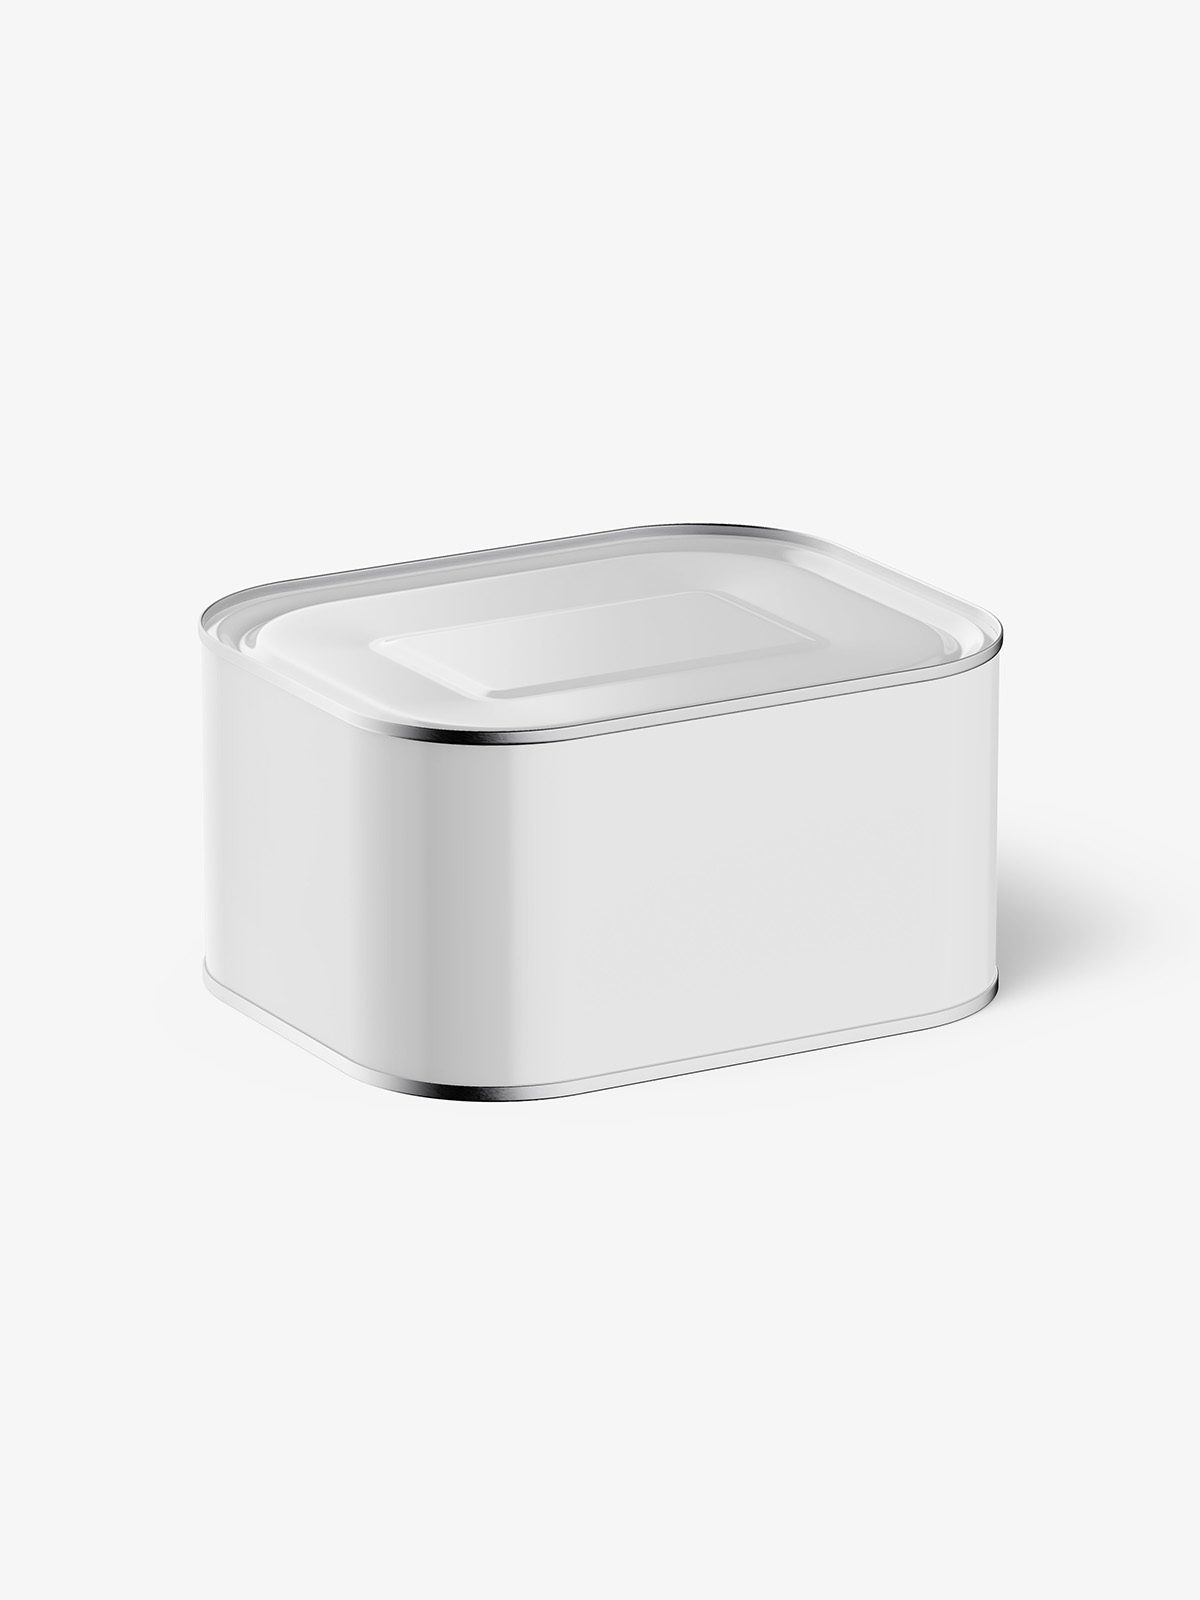 Download Glossy Rectangle Tin Can Mockup 630 Ml Top View Smarty Mockups